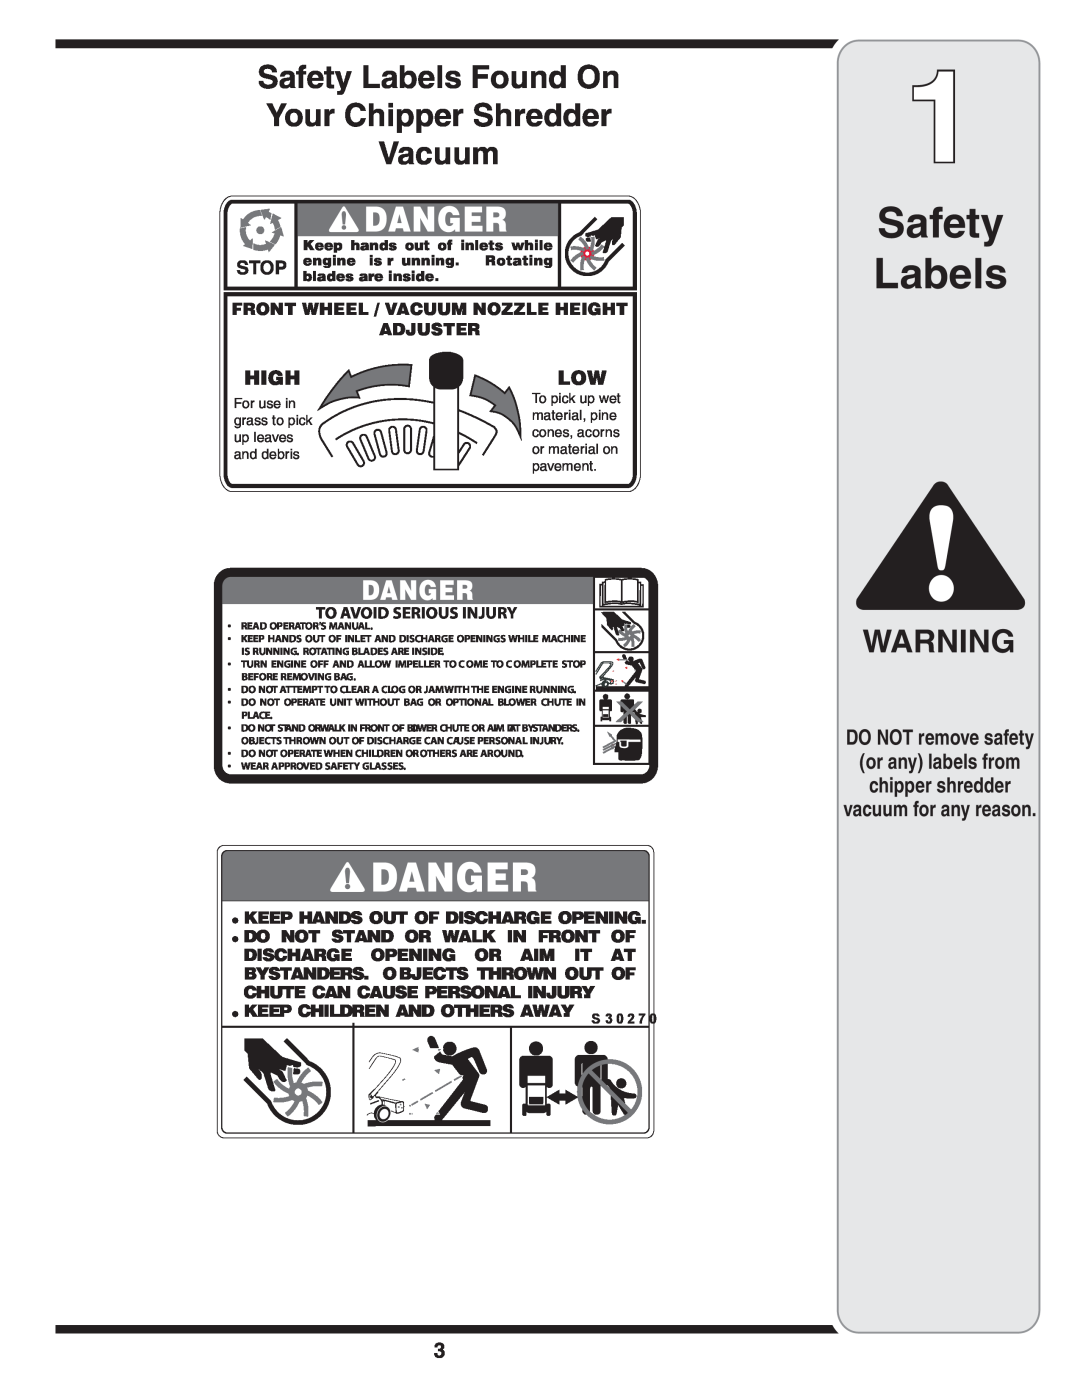 Troy-Bilt 70 warranty Safety Labels Found On Your Chipper Shredder Vacuum, vacuum for any reason, Danger, Highlow, Stop 